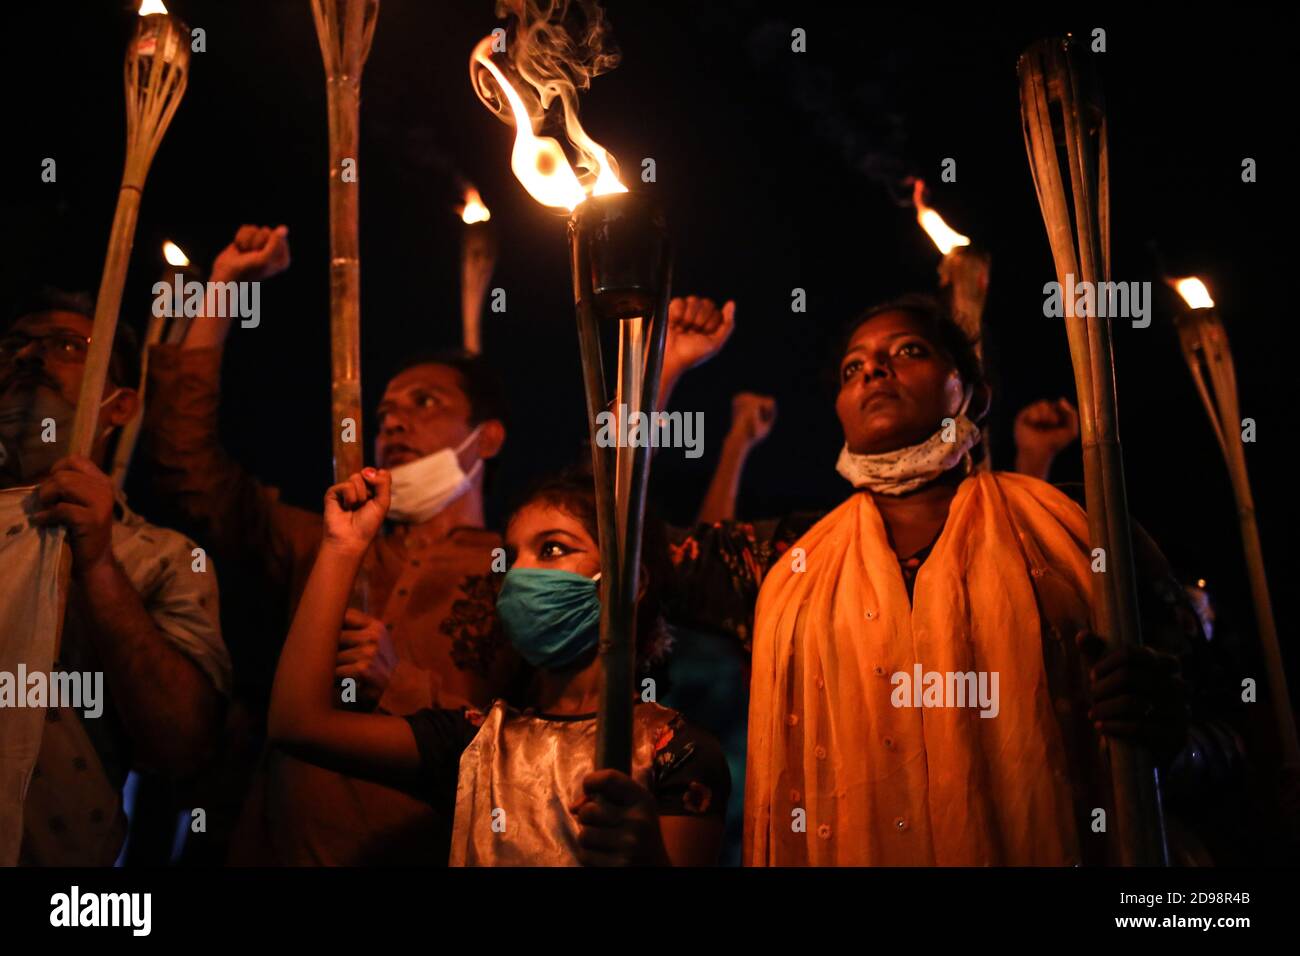 Dhaka, Dhaka, Bangladesh. 3rd Nov, 2020. Progressive organizations have taken out torch procession demanding justice for the burning of people in Lalmonirhat and the attack on the houses of the Hindu community in Muradnagar, Comilla, on charges of insulting religion during the COVID-19 pandemic on 3rd November, 2020. Credit: Md. Rakibul Hasan/ZUMA Wire/Alamy Live News Stock Photo